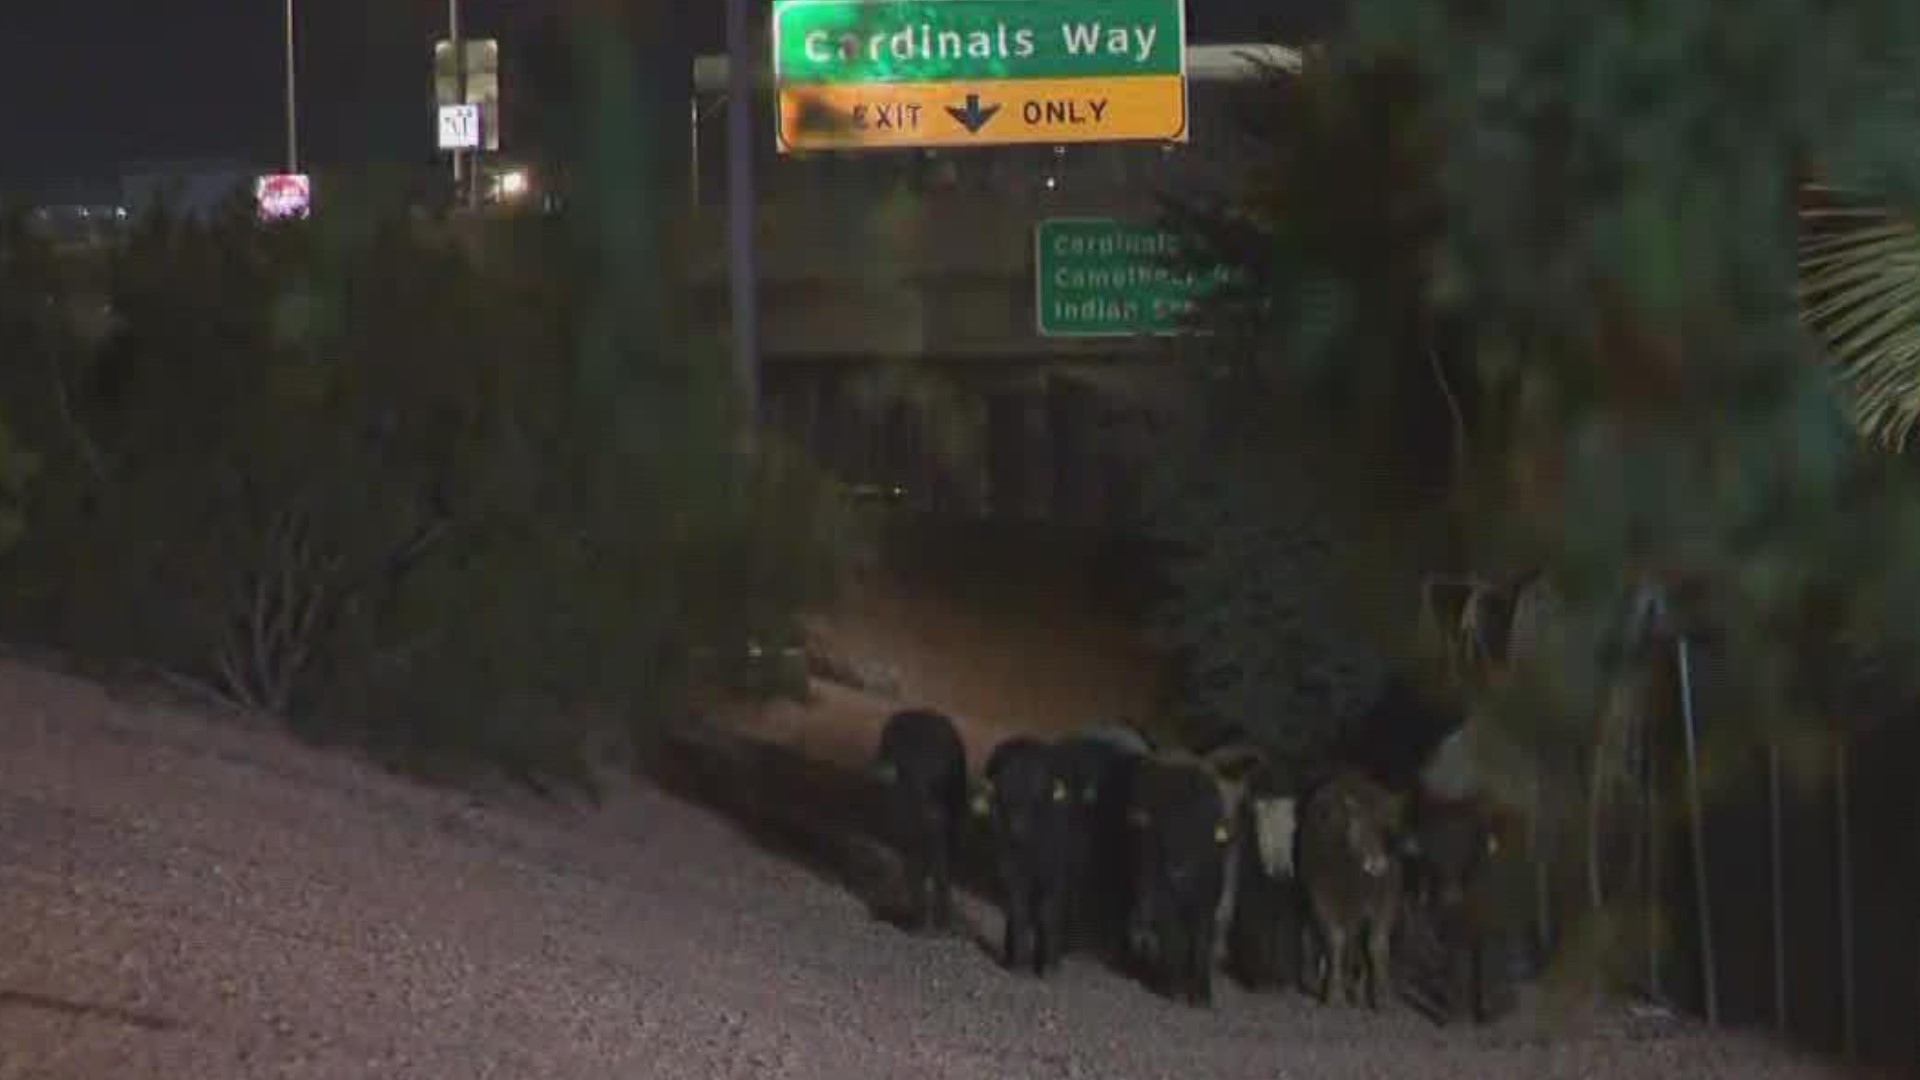 The roadway near Westgate had an unusual traffic situation after a trailer hauling cows crashed nearby and cows got loose.